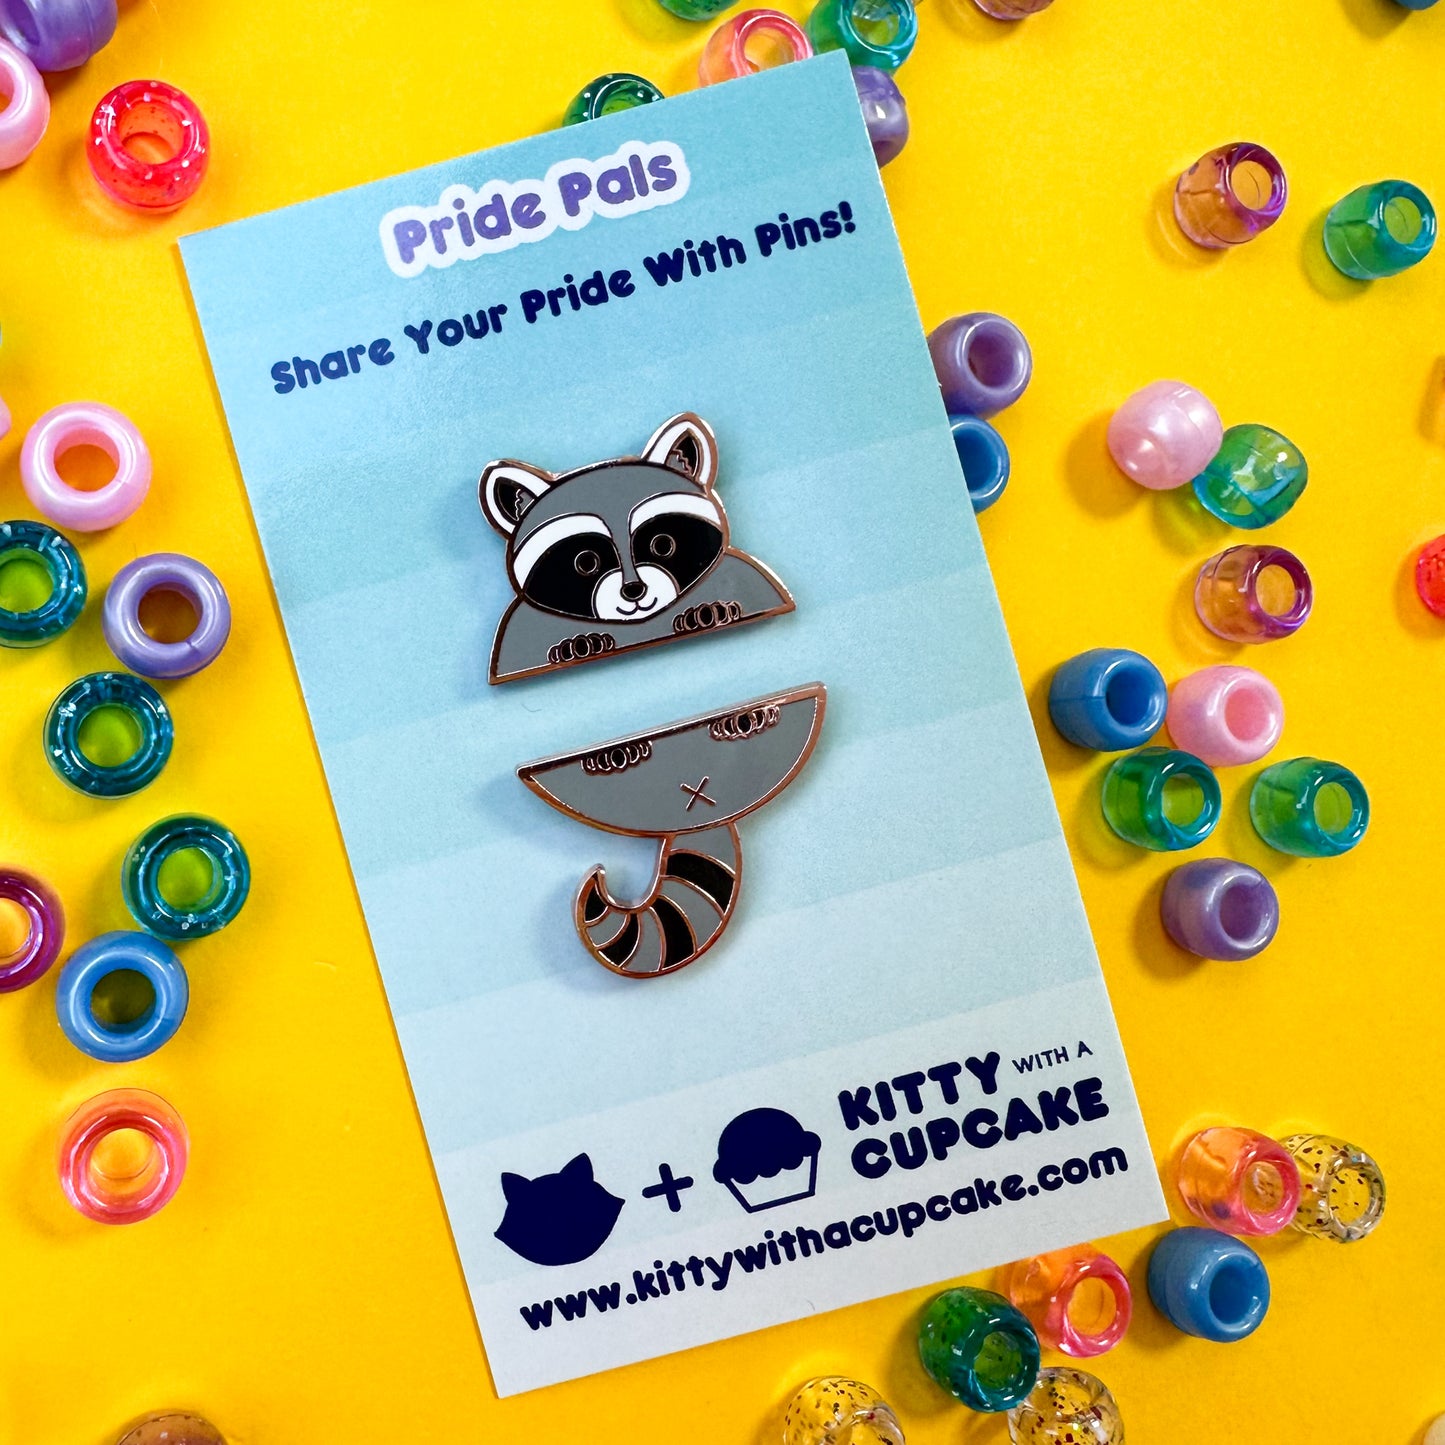 Two enamel pins that come together to form a cute raccoon. The pins are packaged on a card that is sitting on a yellow background with pony beads around it. 